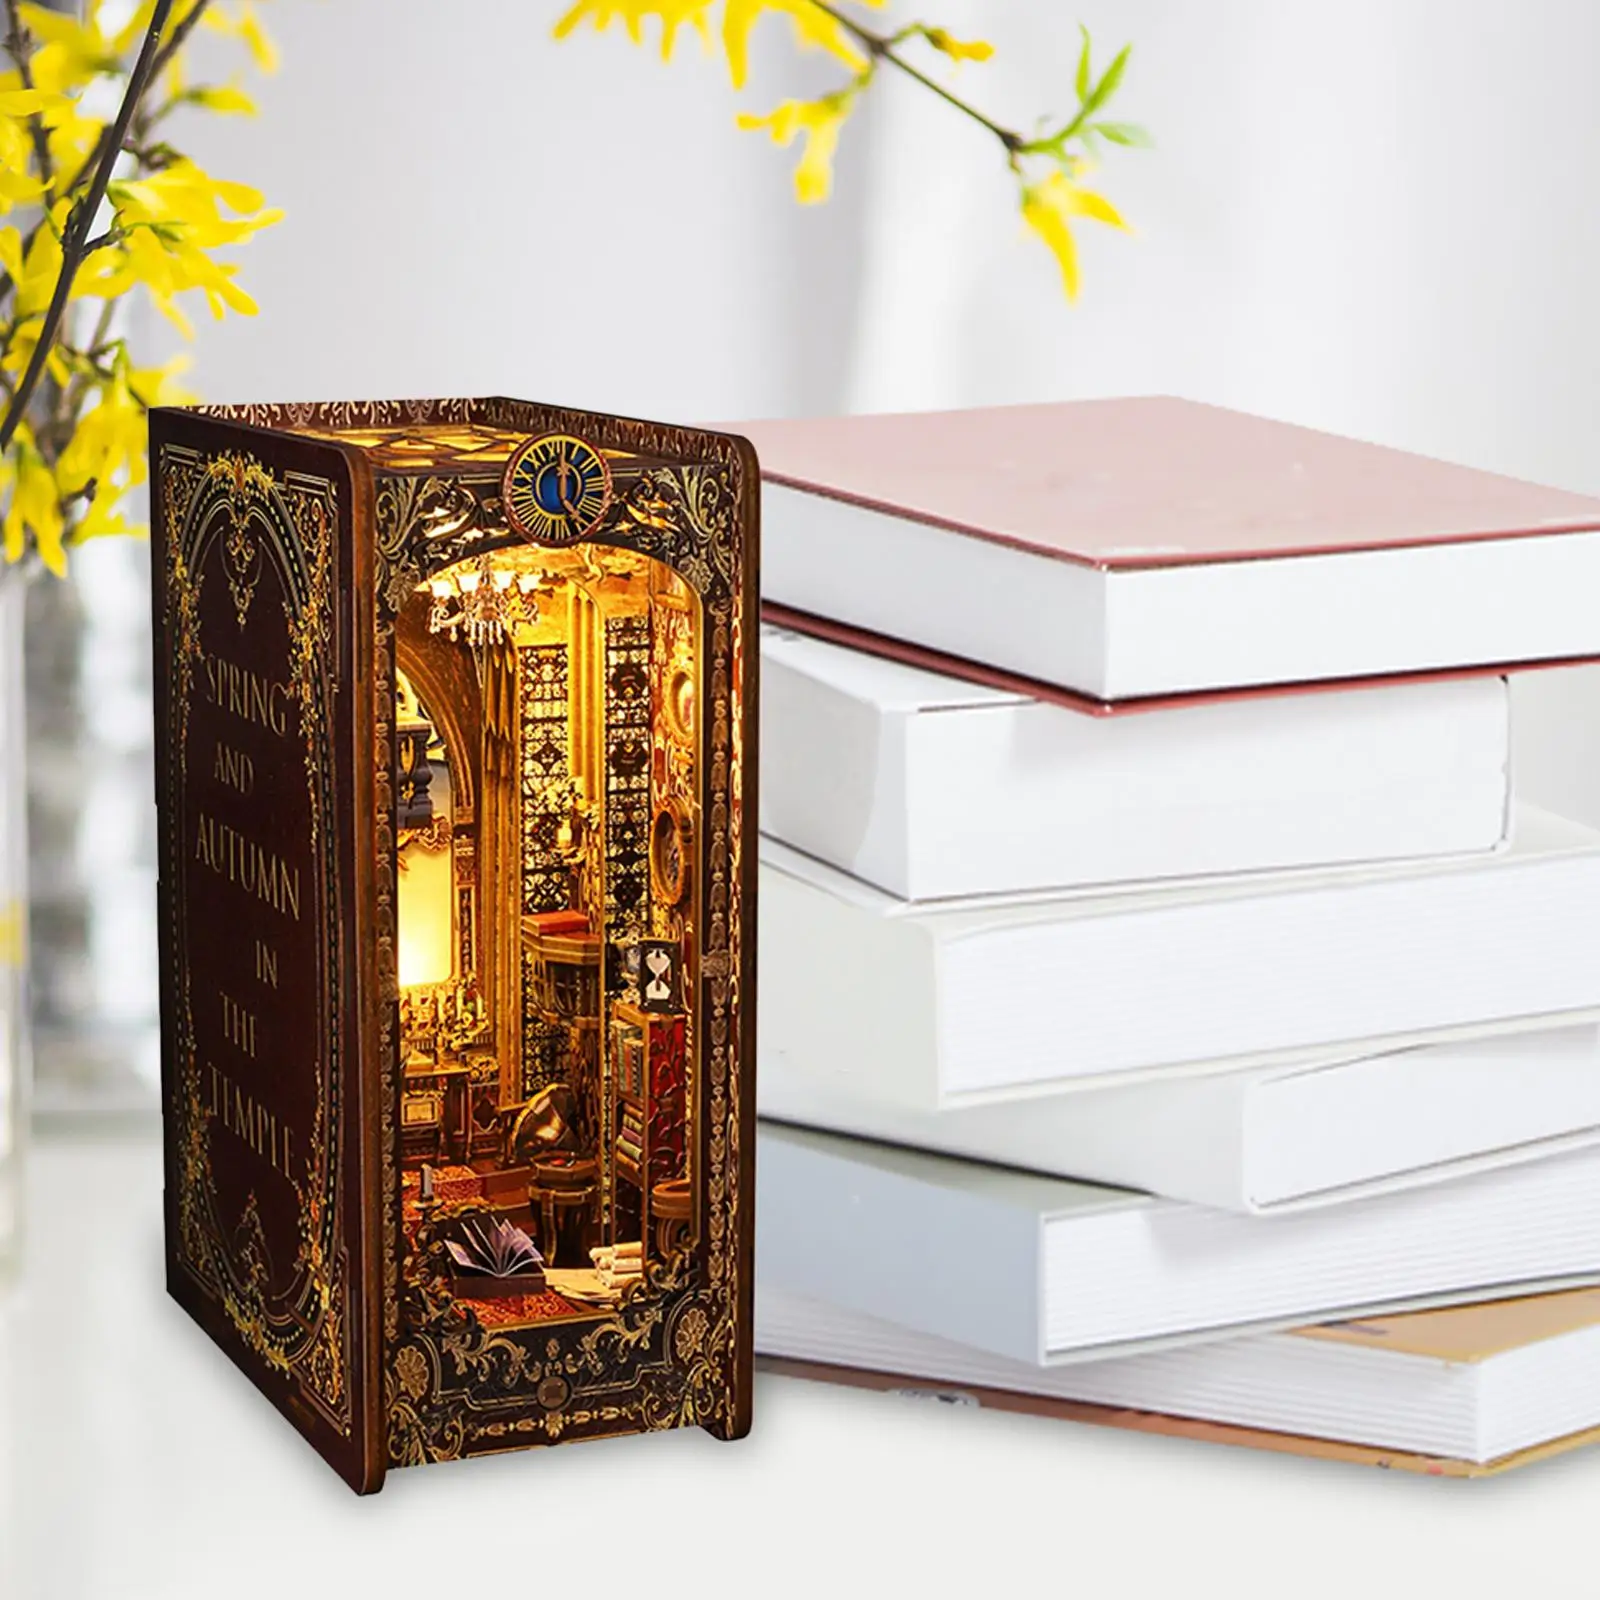 DIY Wooden Alley Booknook with LED Light Miniature House Bookshelf Insert Booknook for Home Office Living Room Book Decorations